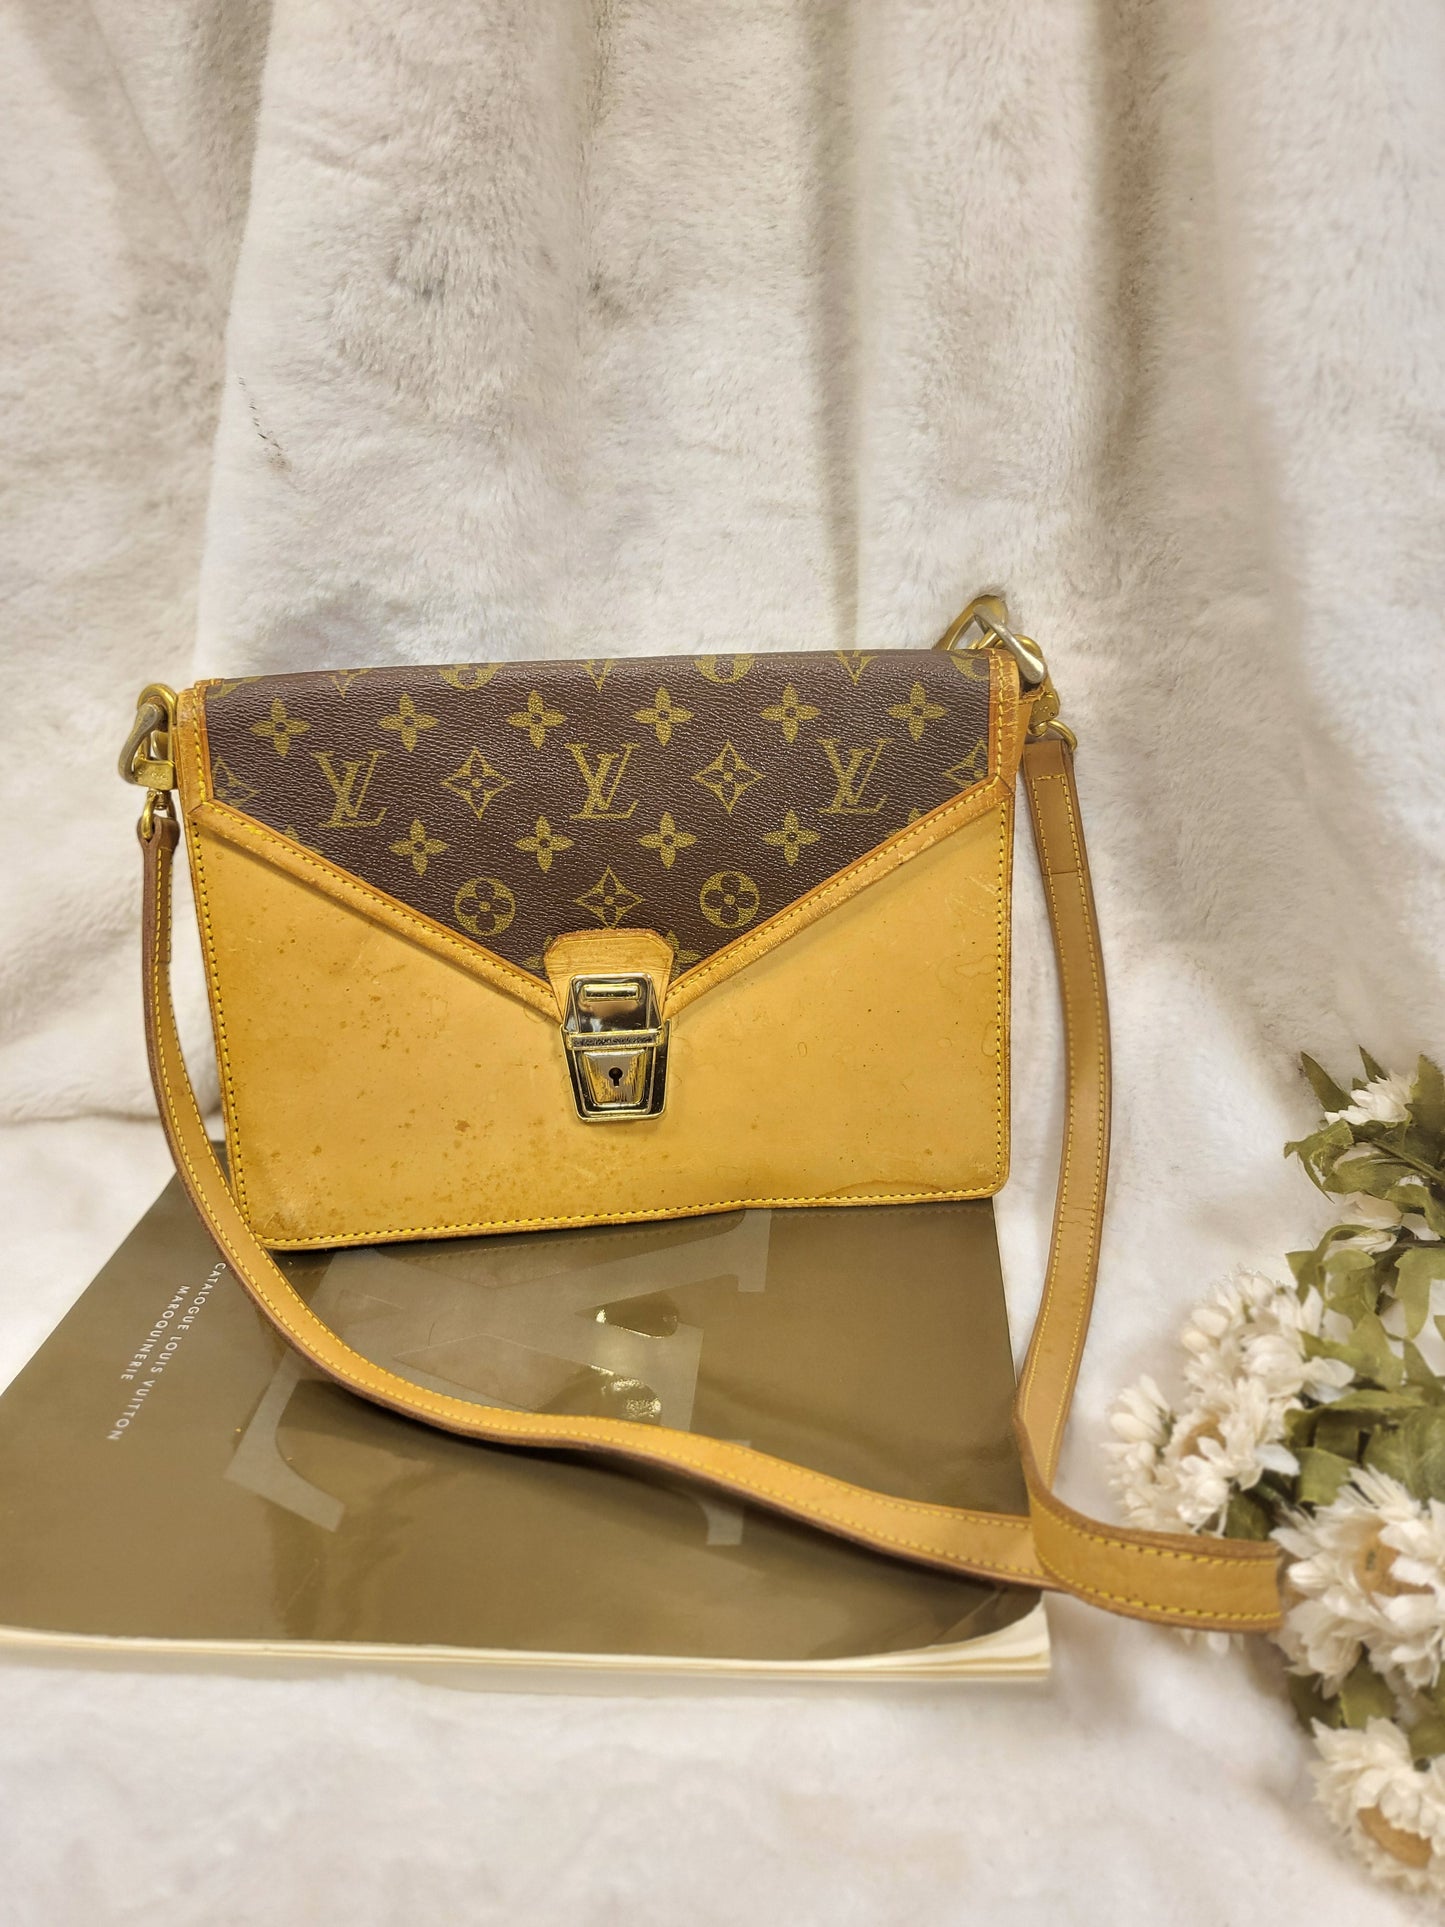 Authentic pre-owned Louis Vuitton sac biface calfskin hinomoto limited edition crossbody shoulder bag